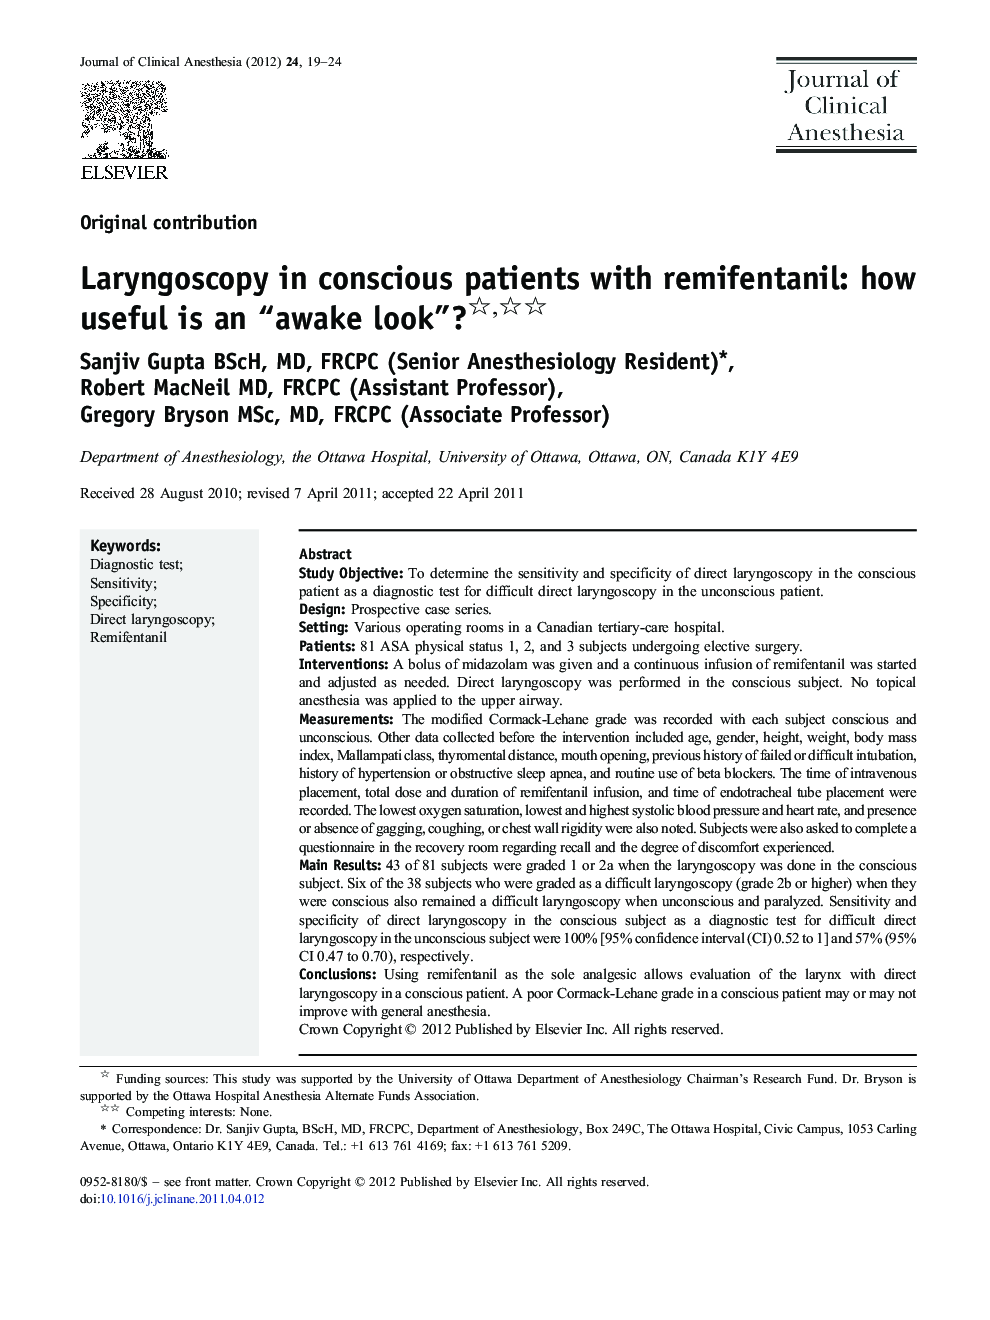 Laryngoscopy in conscious patients with remifentanil: how useful is an “awake look”?